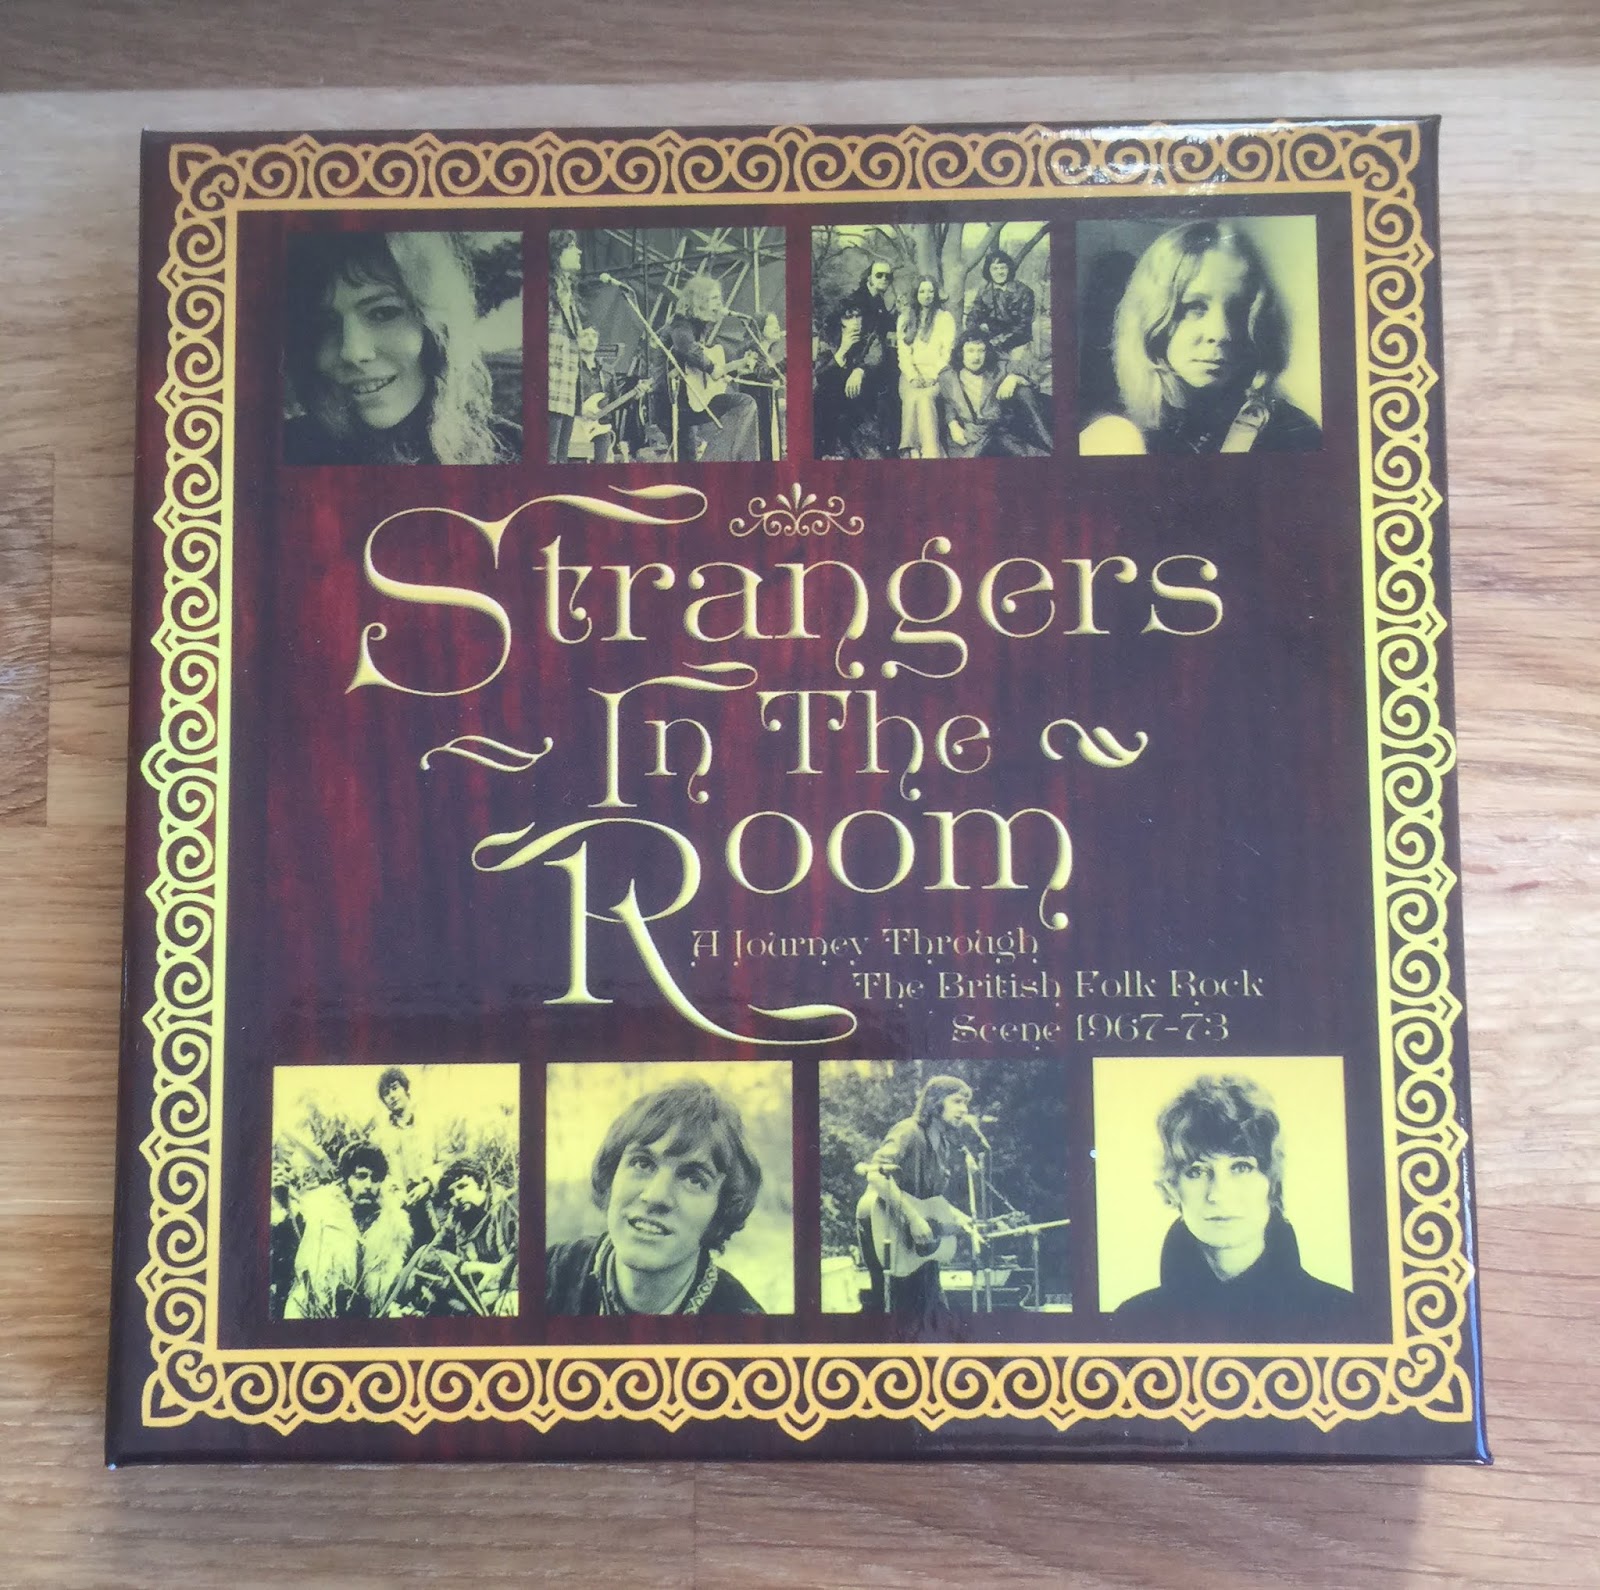 Sounds Good Looks Good Strangers In The Room A Journey Through The British Folk Rock Scene 1967 73 By Various March 19 Grapefruit Records 3cd Clamshell Box Set A Review By Mark Barry